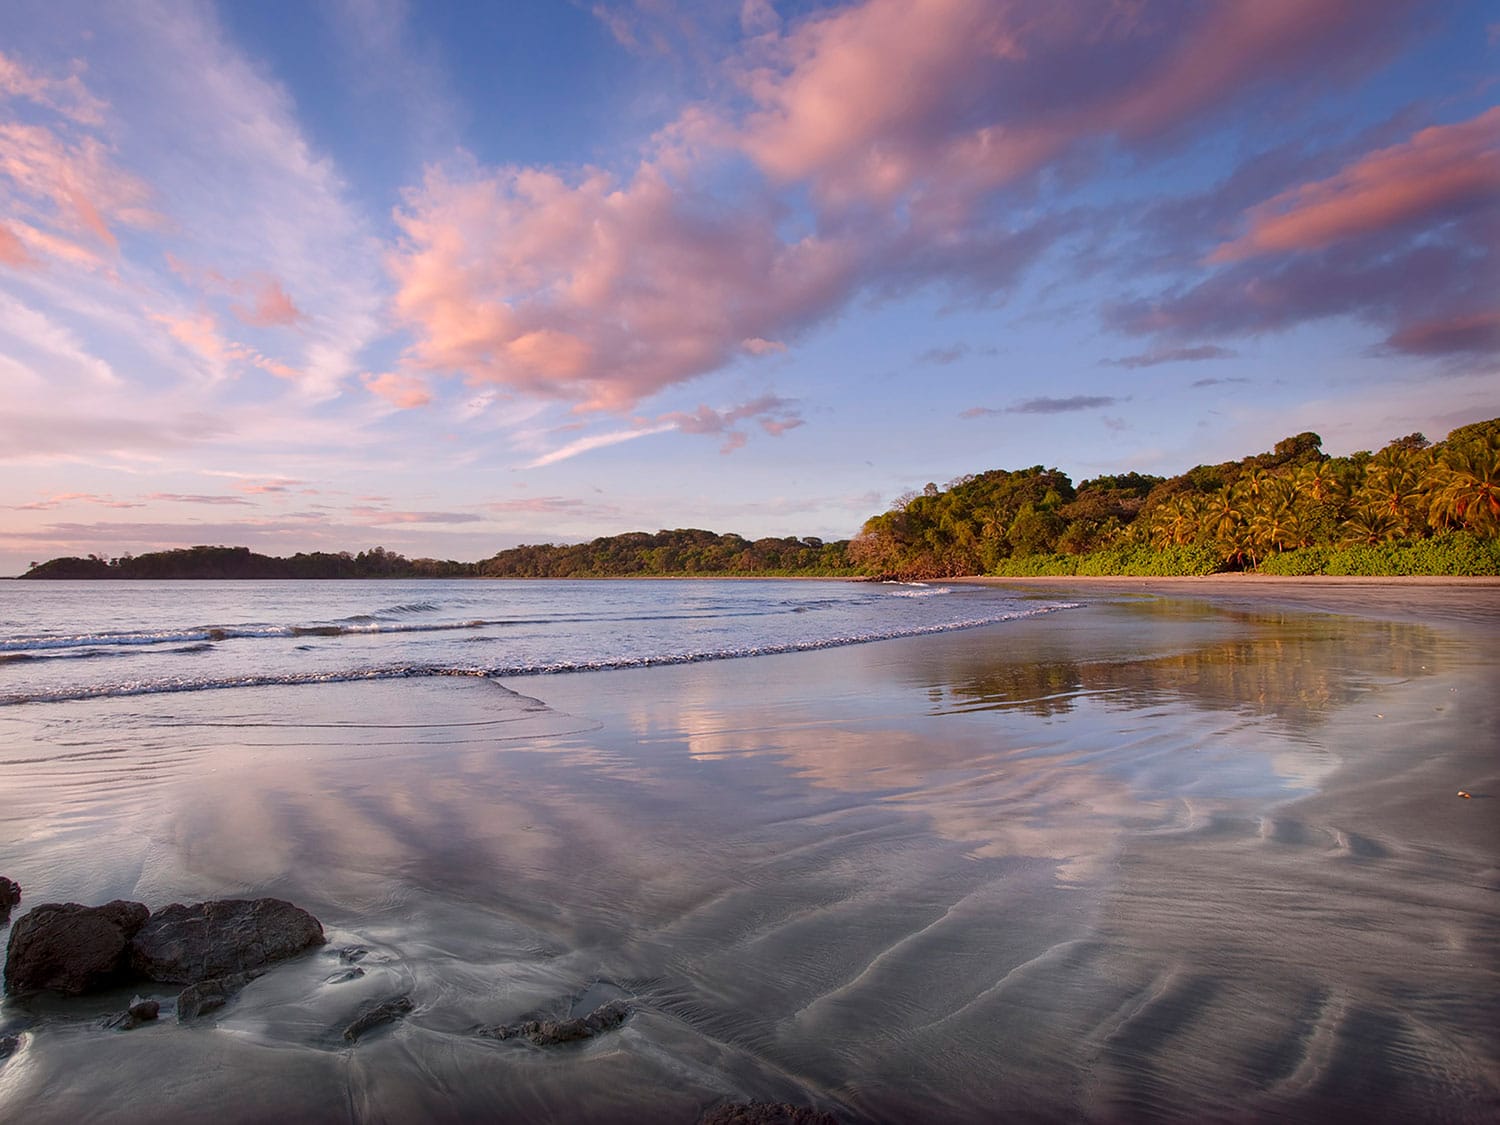 Isla Palenque is an unspoiled destination with marvelous natural beauty.